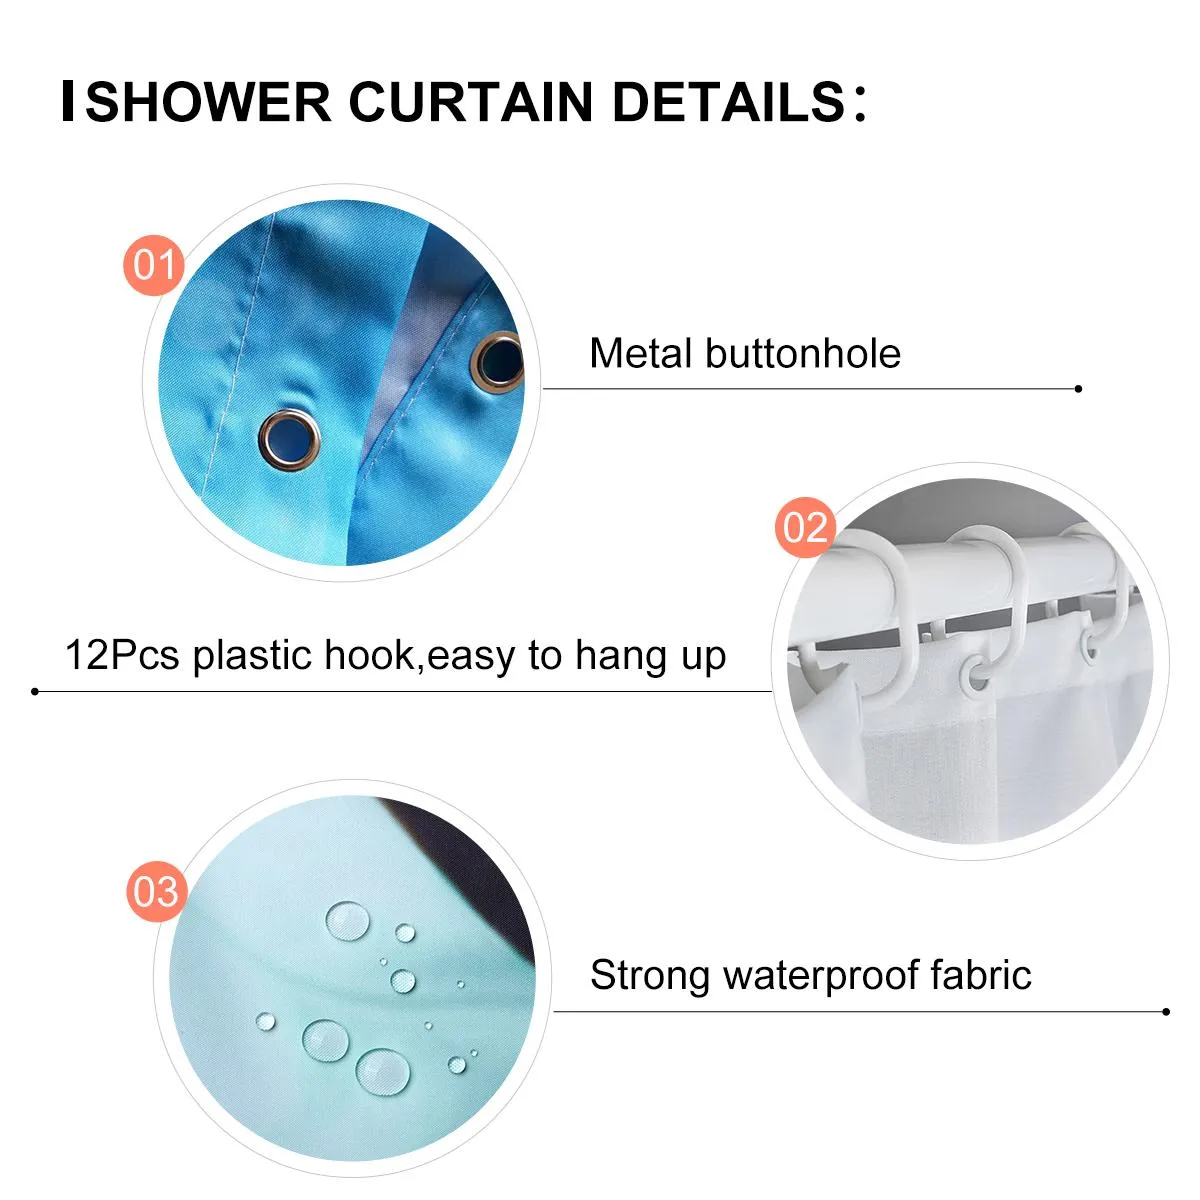 Curtains Turquoise Dahlia Flower Printed Long Shower Curtain Bathroom Waterproof Duschvorhang With Hooks Art Decor Bed Bath and Beyond